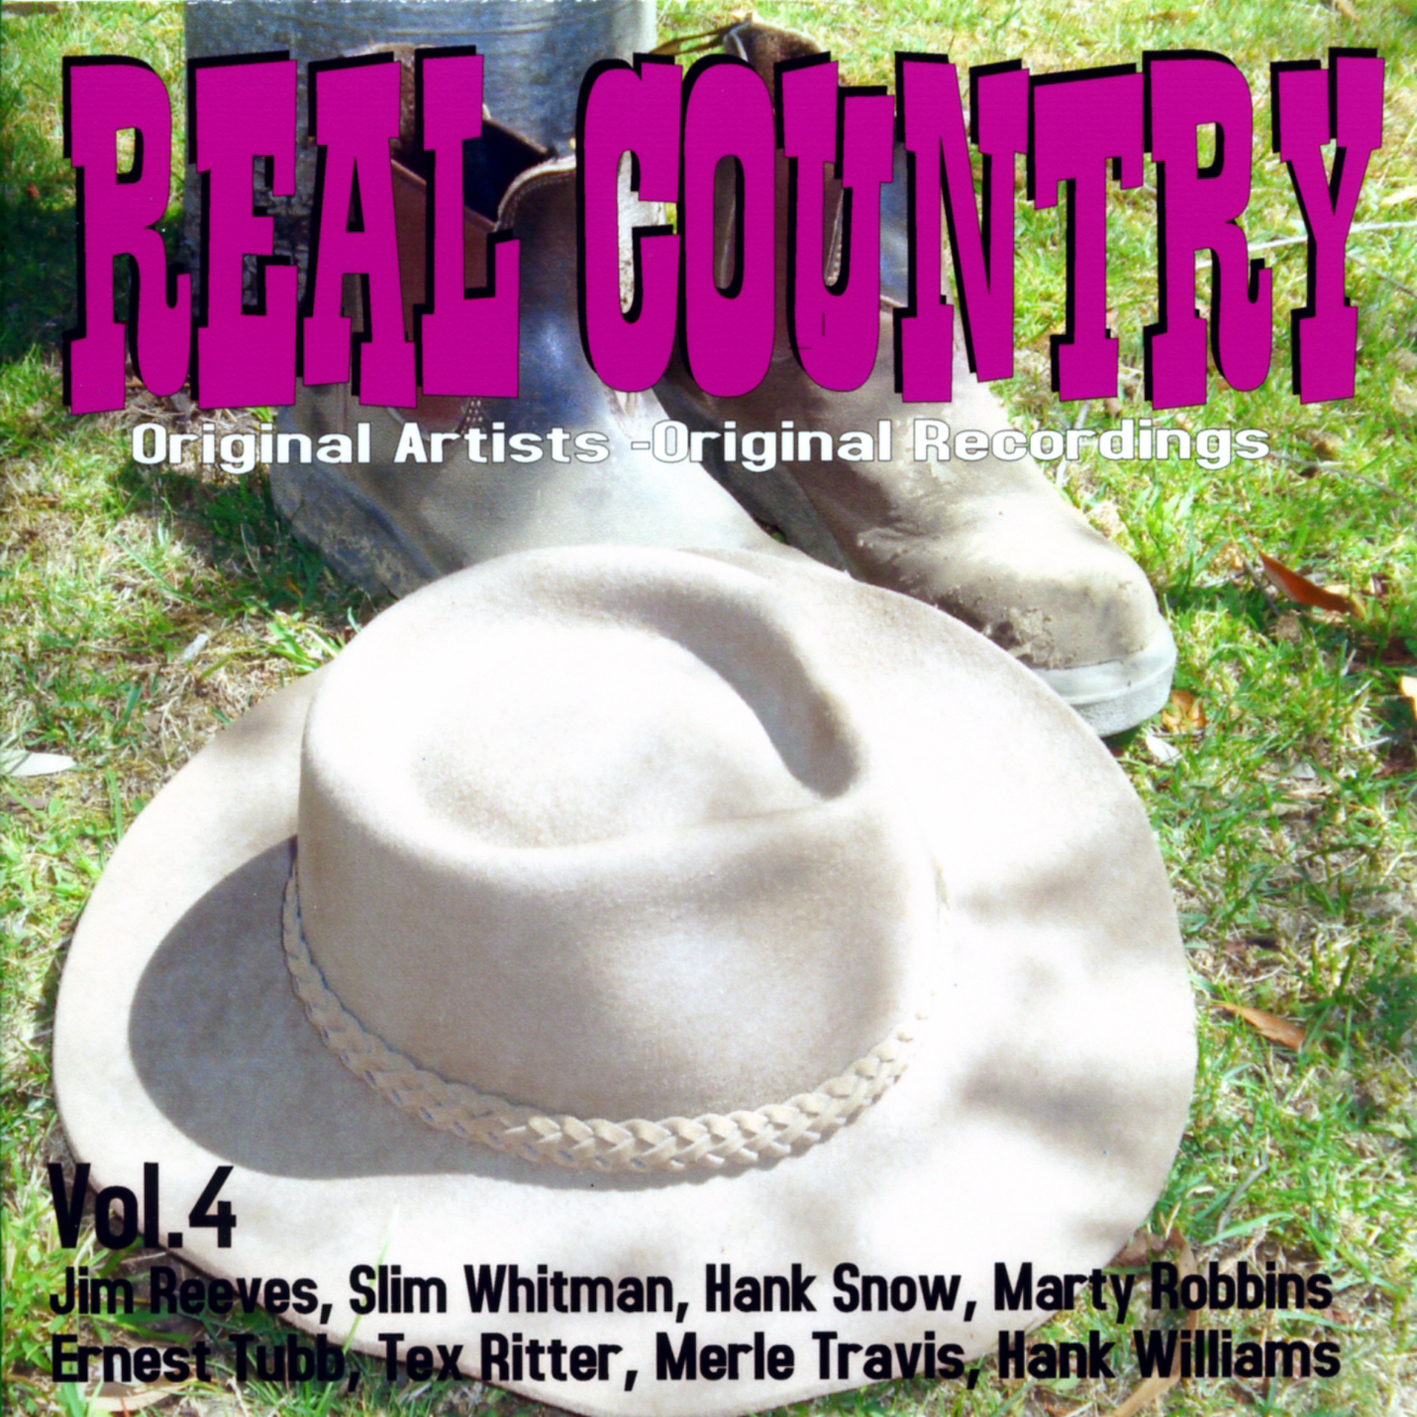 Real Country - Vol. Four